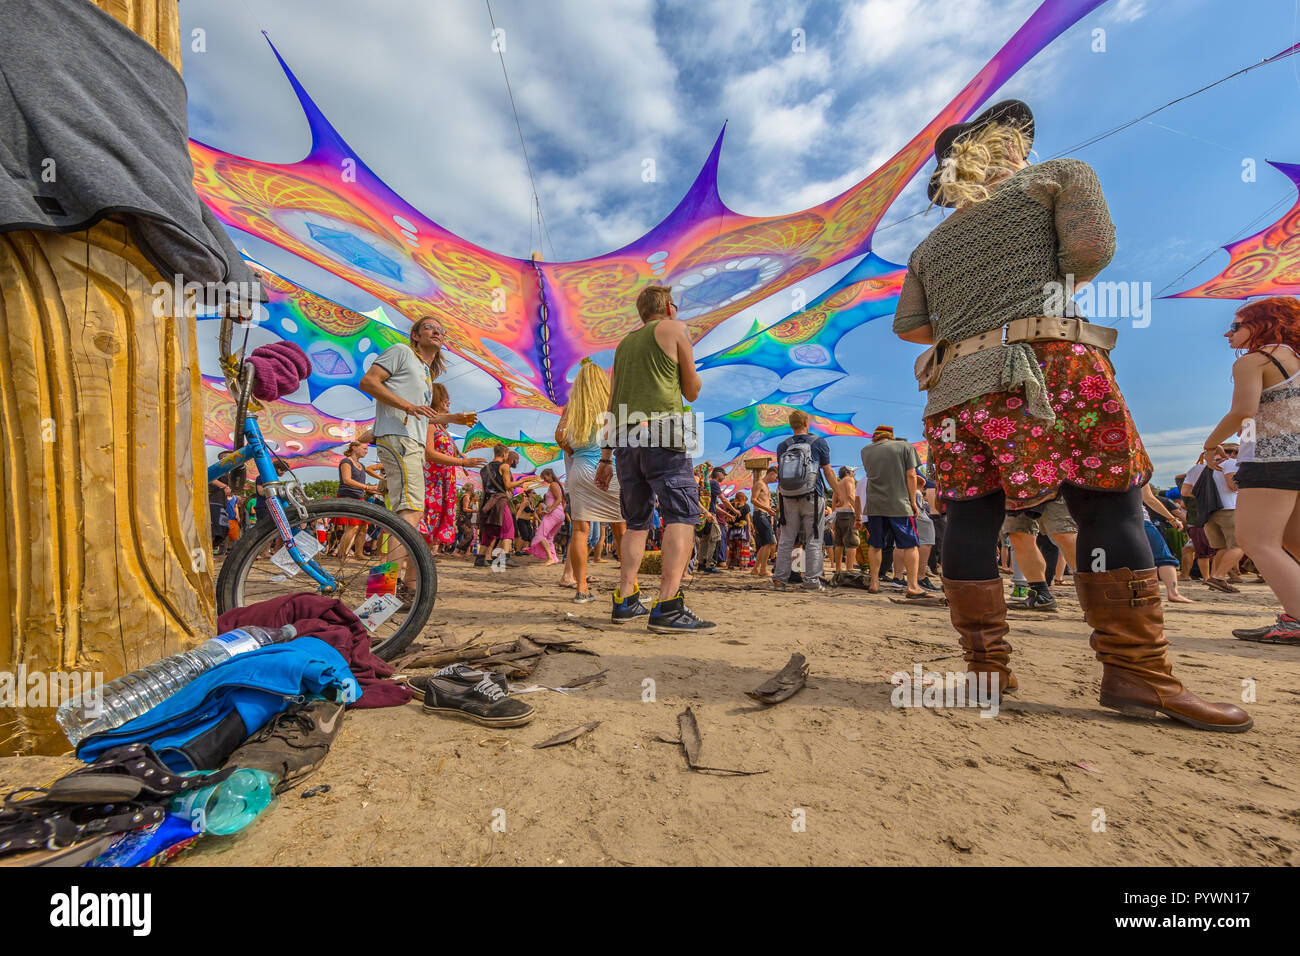 LEEUWARDEN, NETHERLANDS-AUGUST 30, 2015: Decoration, shoes, bicycle and people partying on the sandy dance floor at Psy-Fi open air psychedelic trance Stock Photo